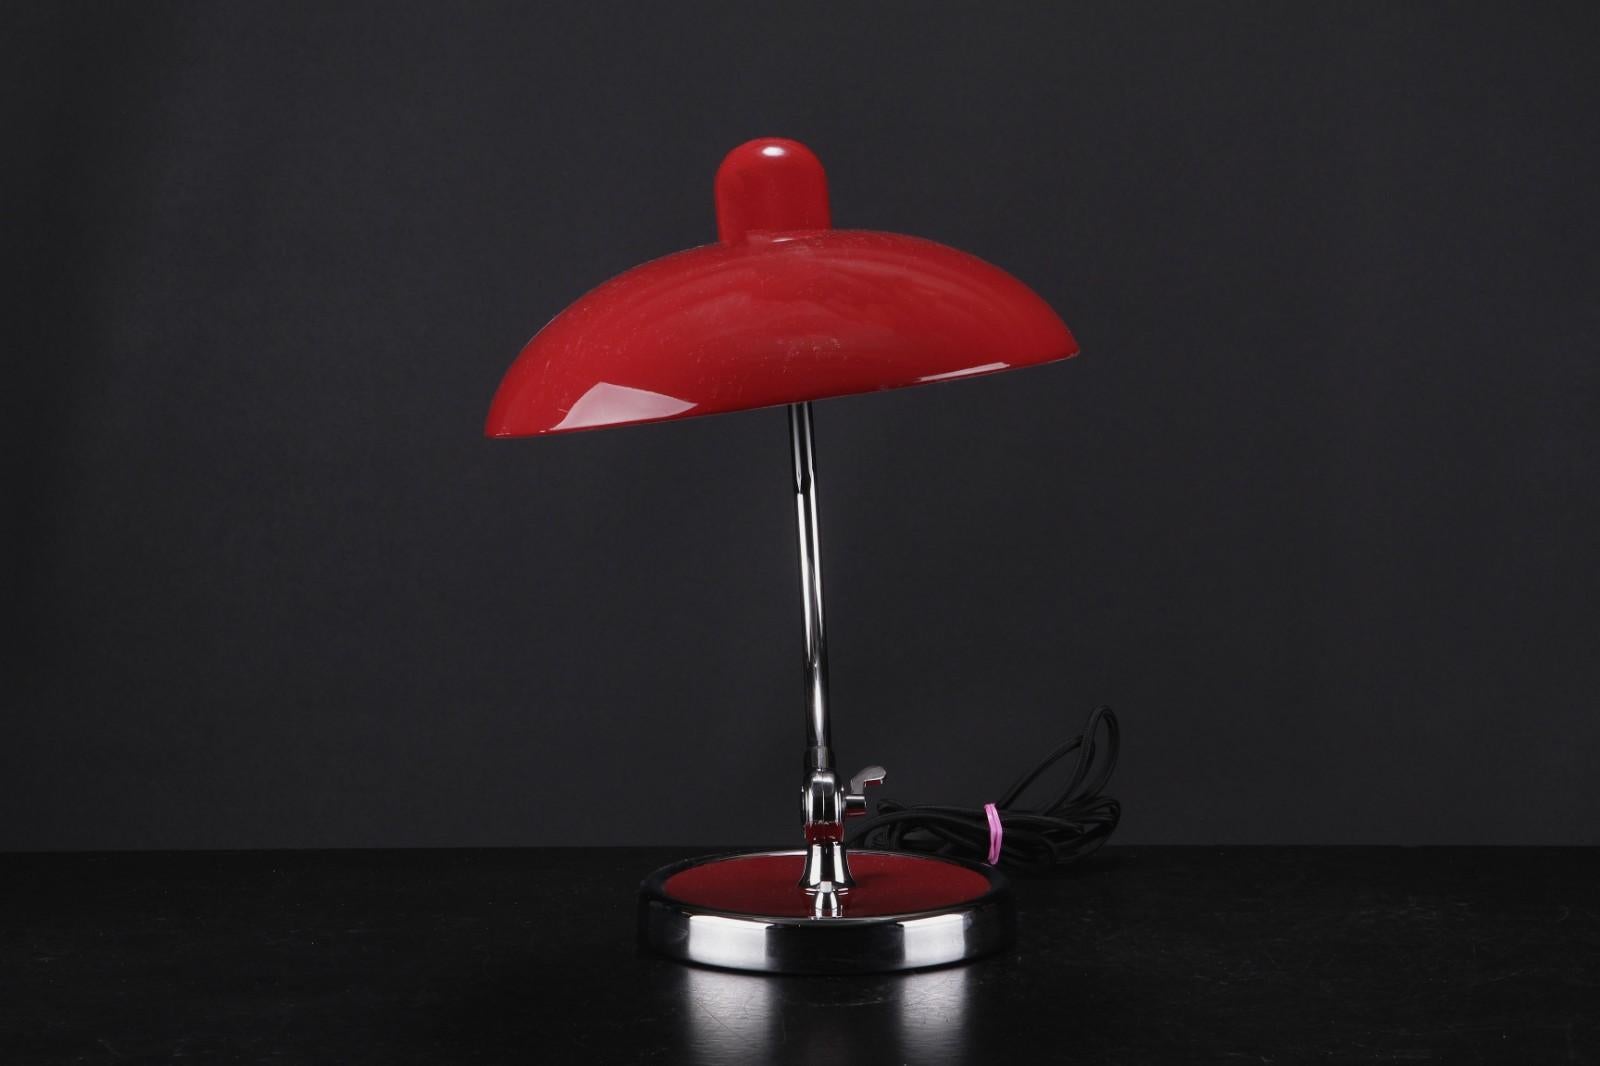 Christian Dell. Kaiser table lamp, model President of chromed and varnished metal, color: Red High Gloss. Designed in association with Bauhaus in the 1930s. Model No. 6631. H. ca. 43 cm. Ø screen 29 cm. 
Delivery time about 2-3 weeks.